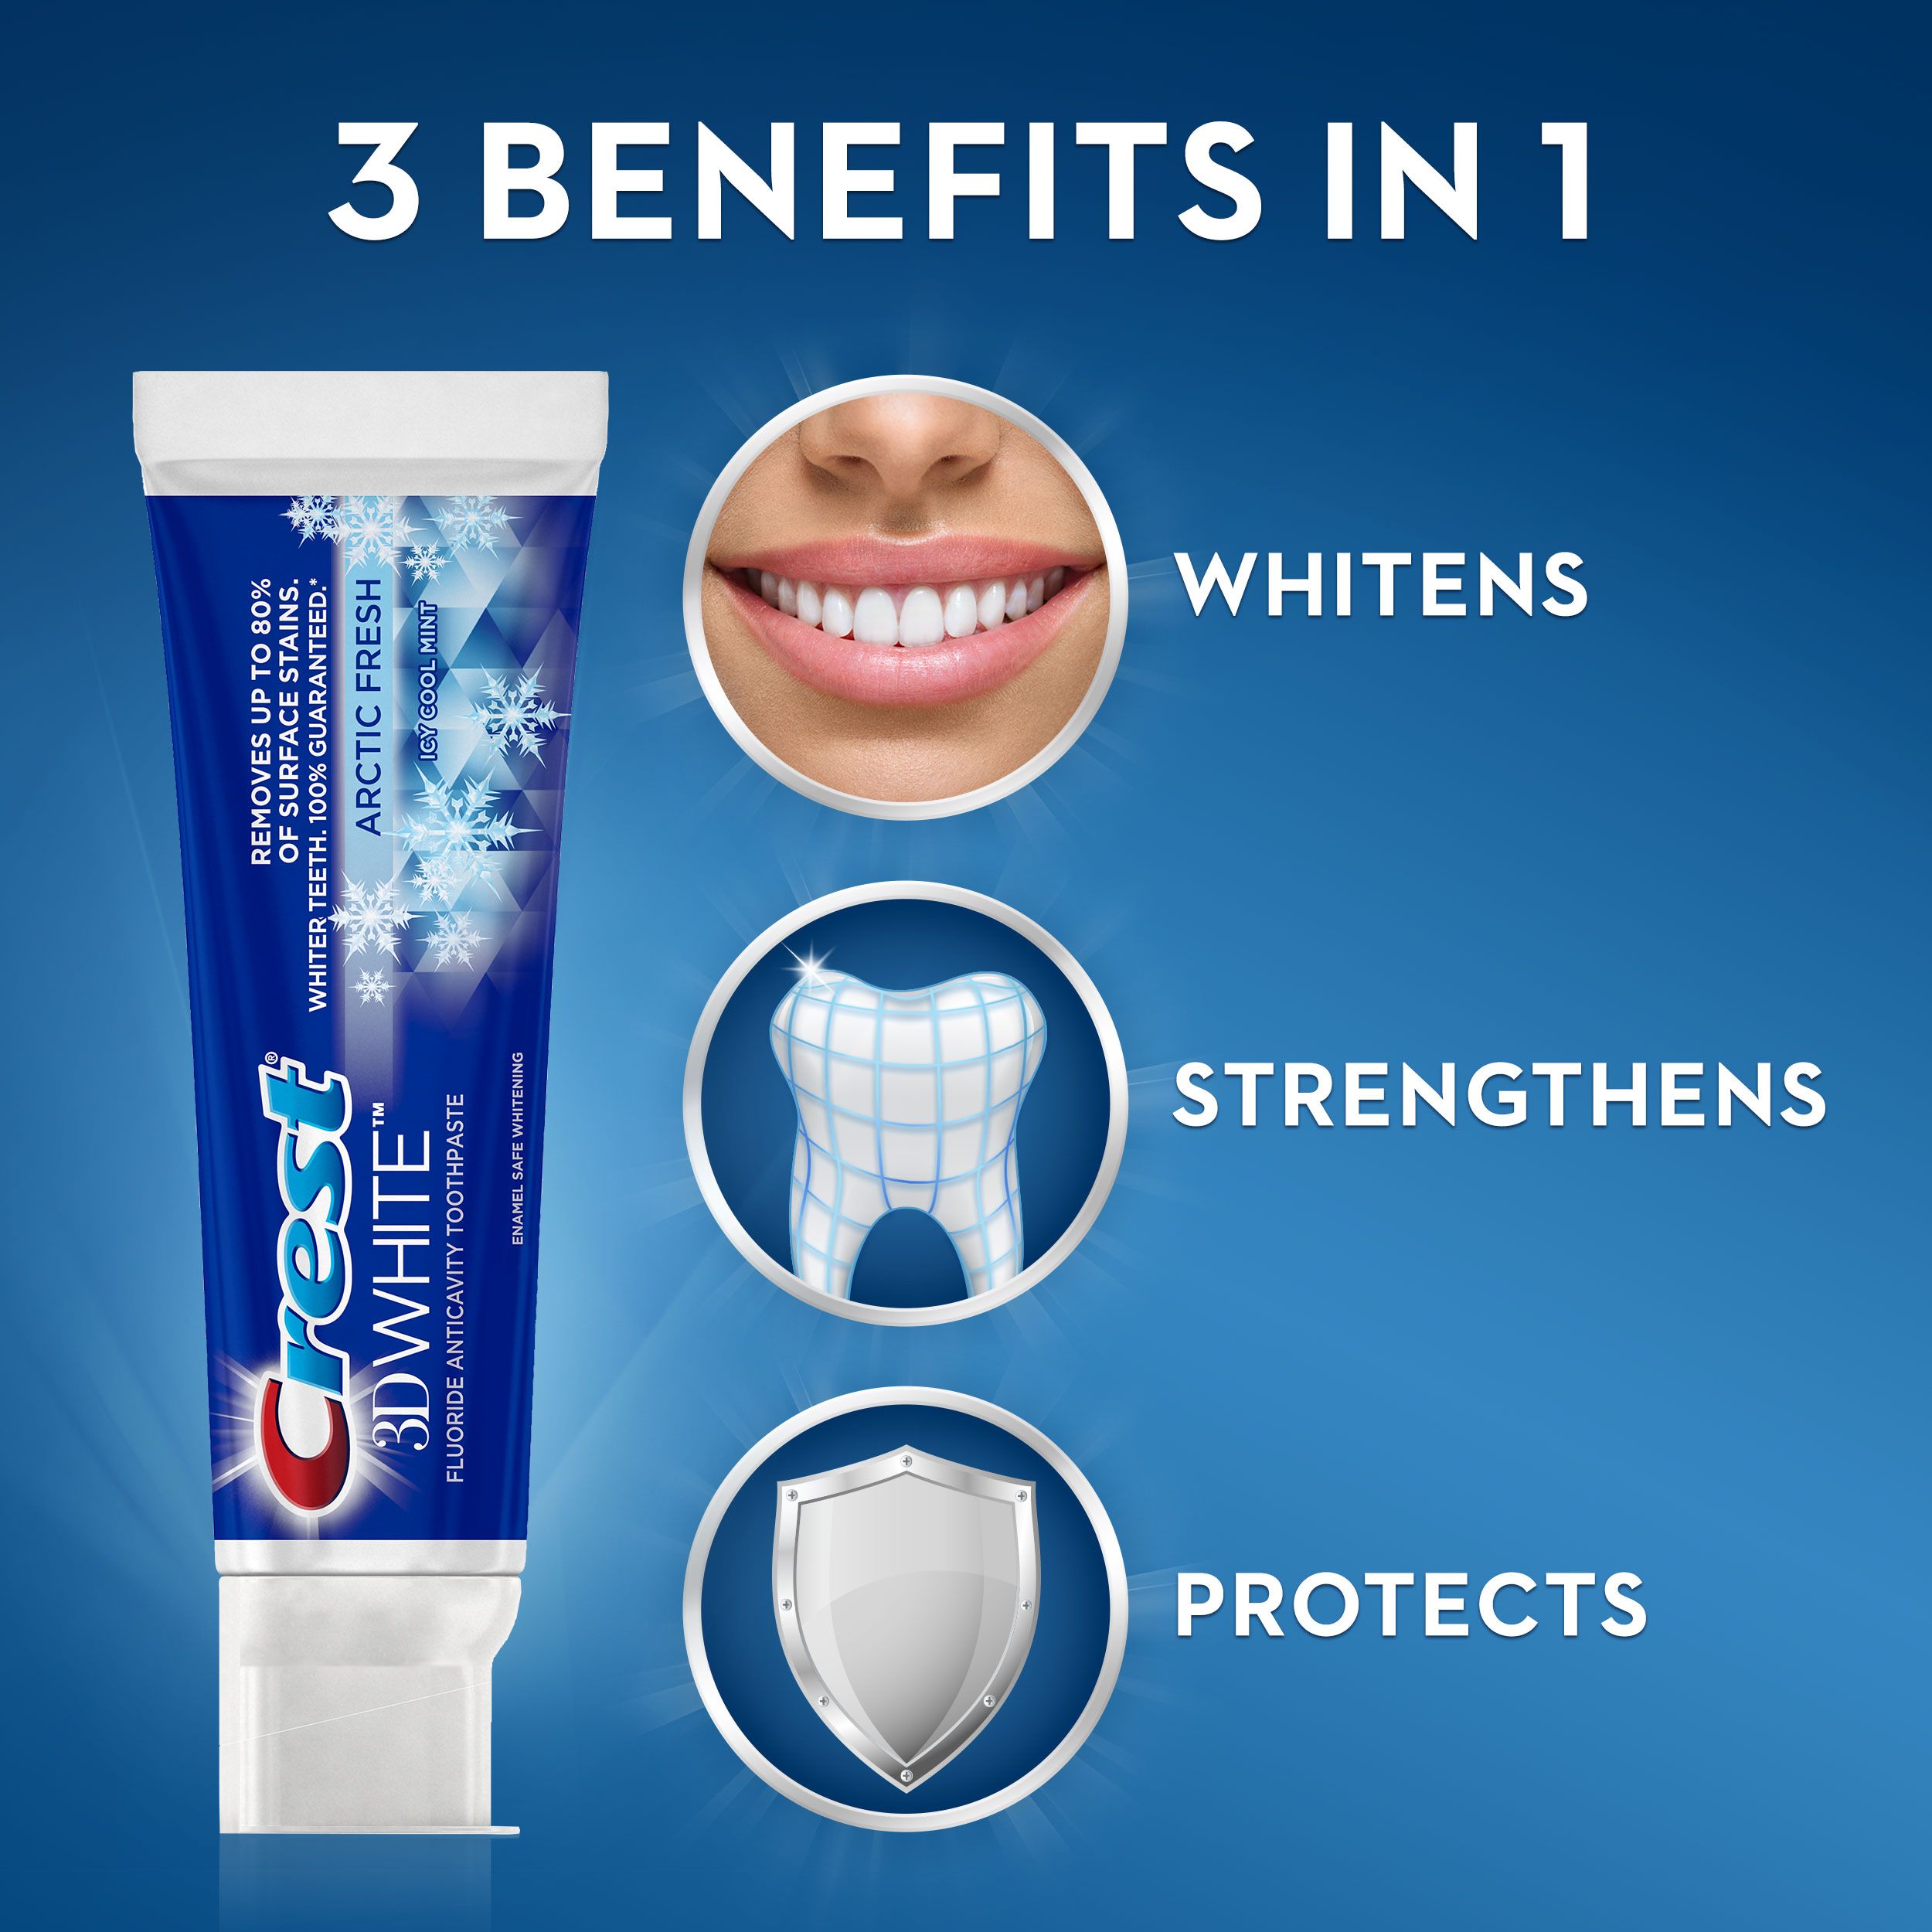 Crest 3D White Whitening Toothpaste, Arctic Fresh, Icy Cool Mint Flavor, 4.8 oz, Pack of 3 - image 2 of 8